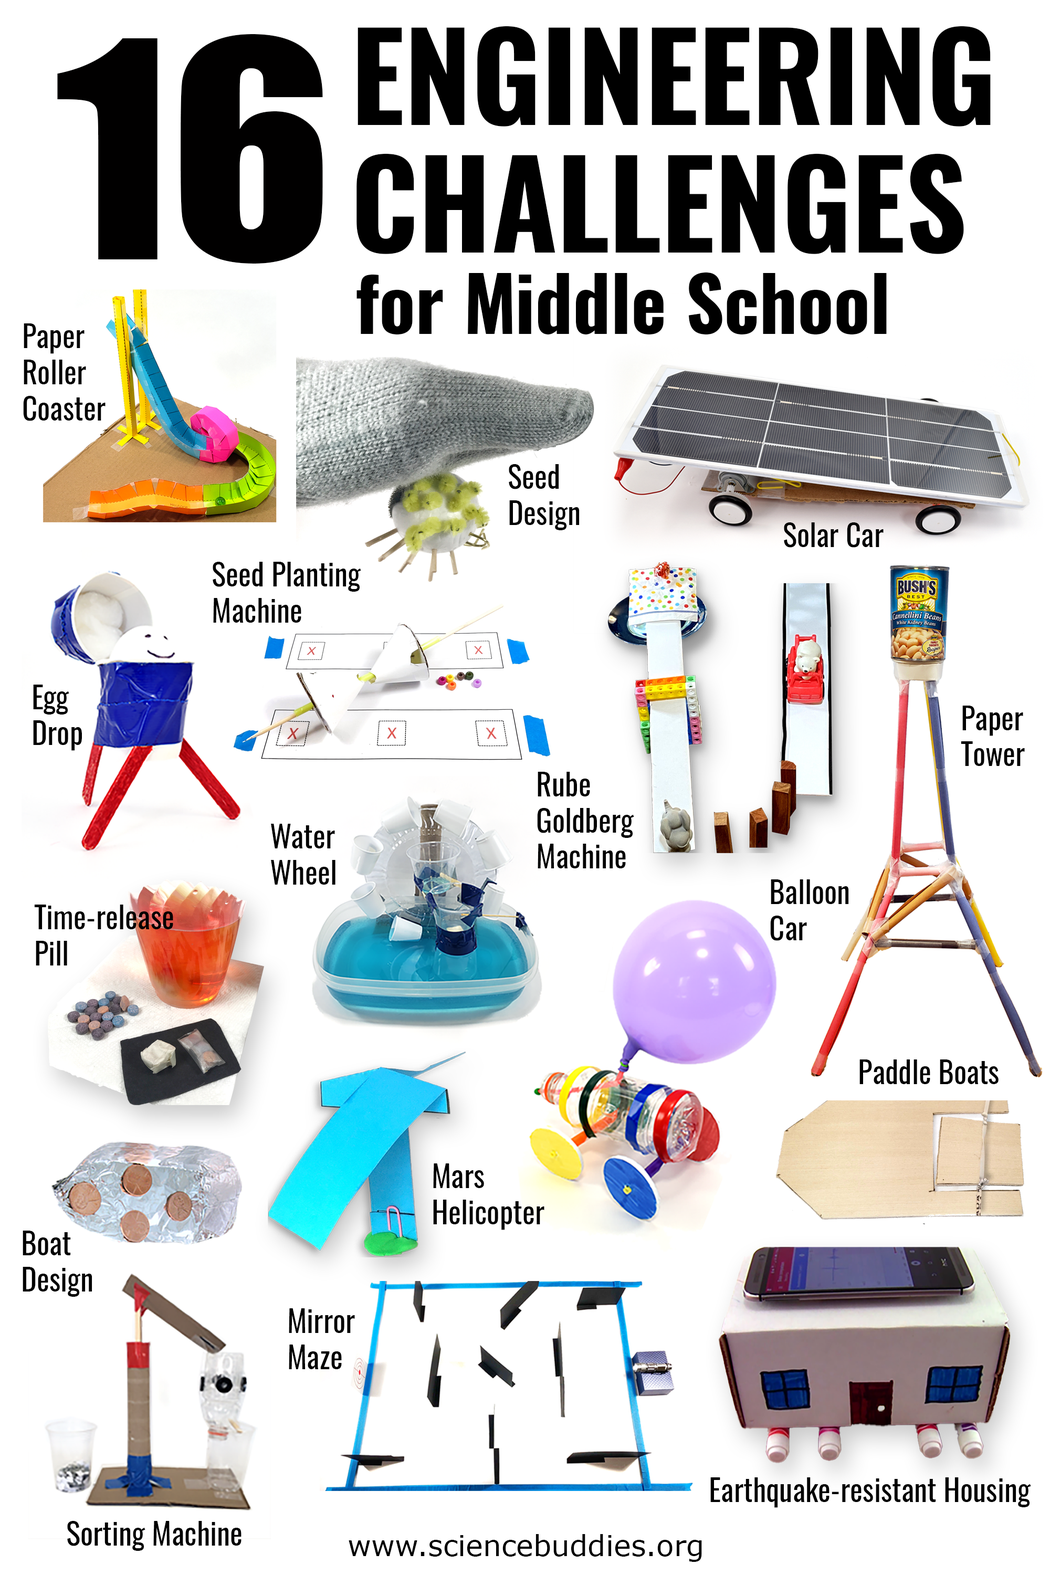 16-engineering-challenges-for-middle-school-science-buddies-blog